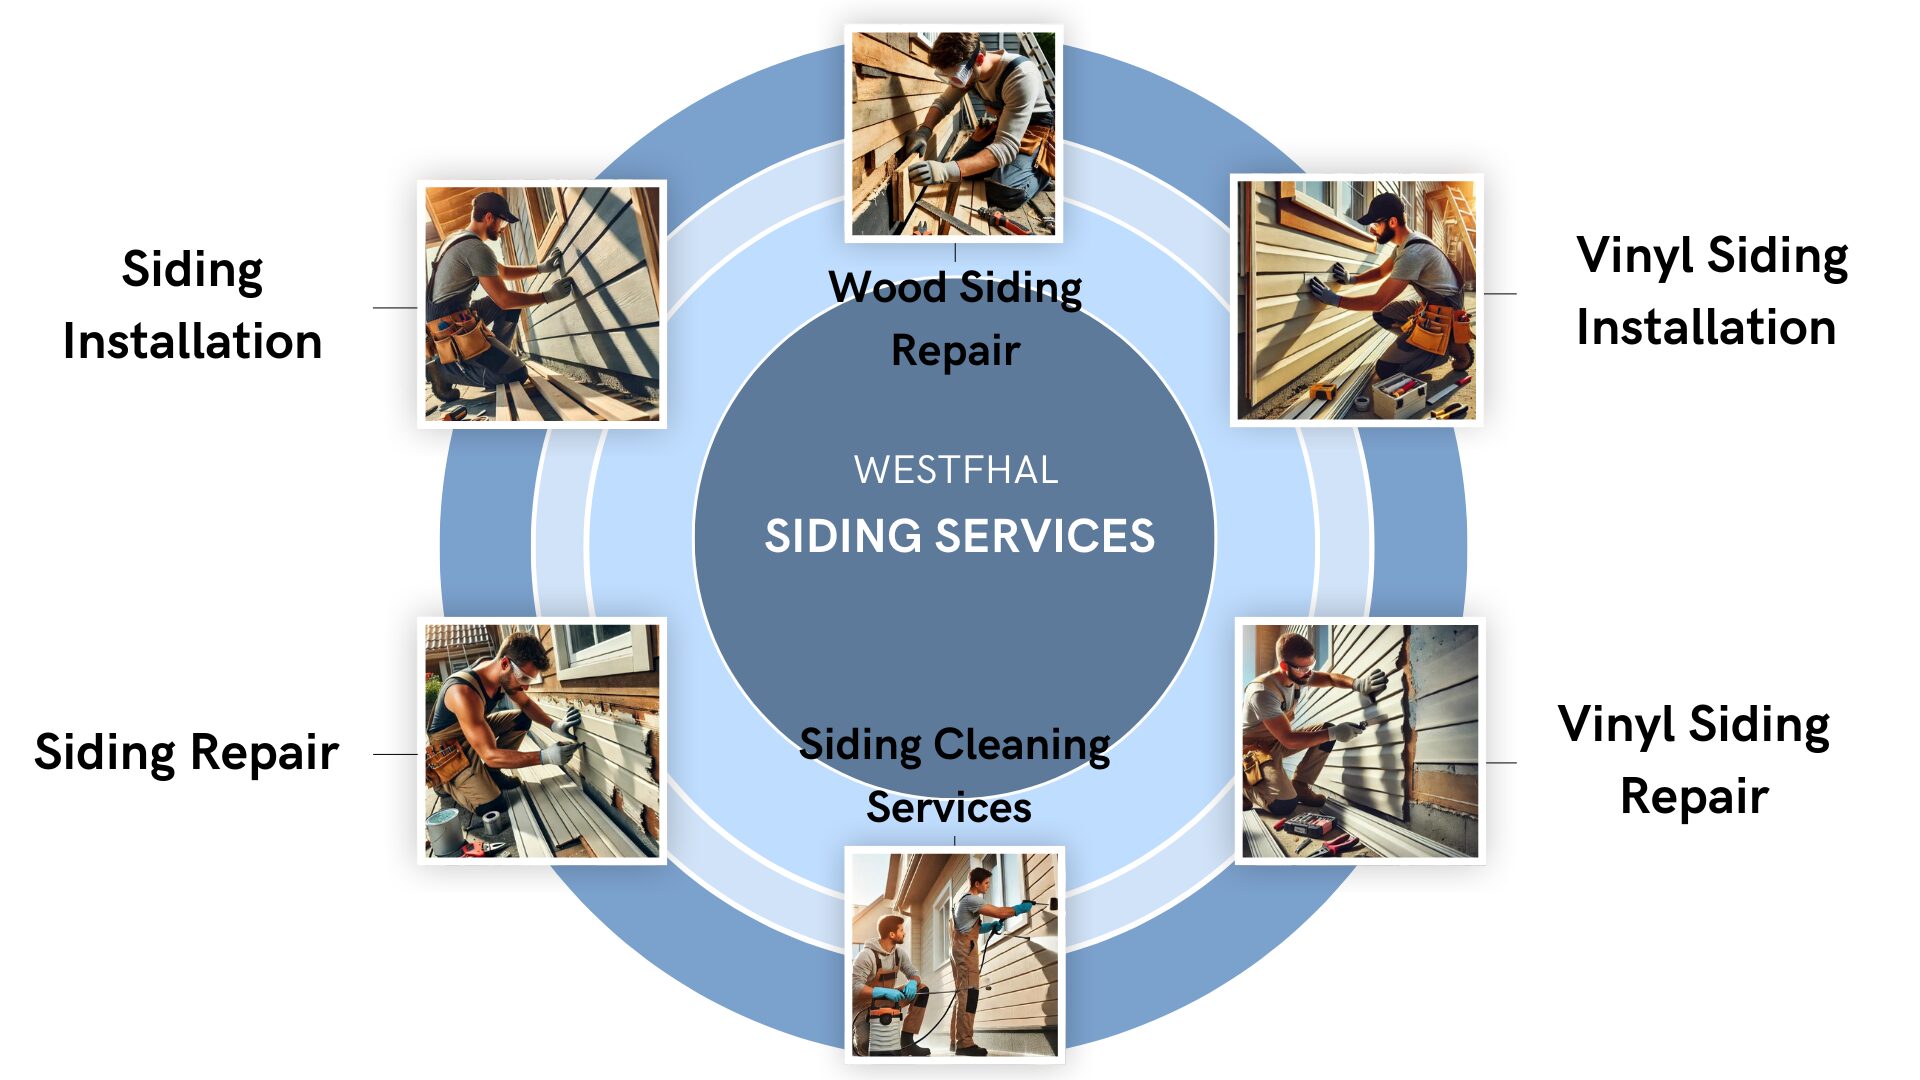 Infographic detailing the steps for siding installation and repair services by Westfhal.